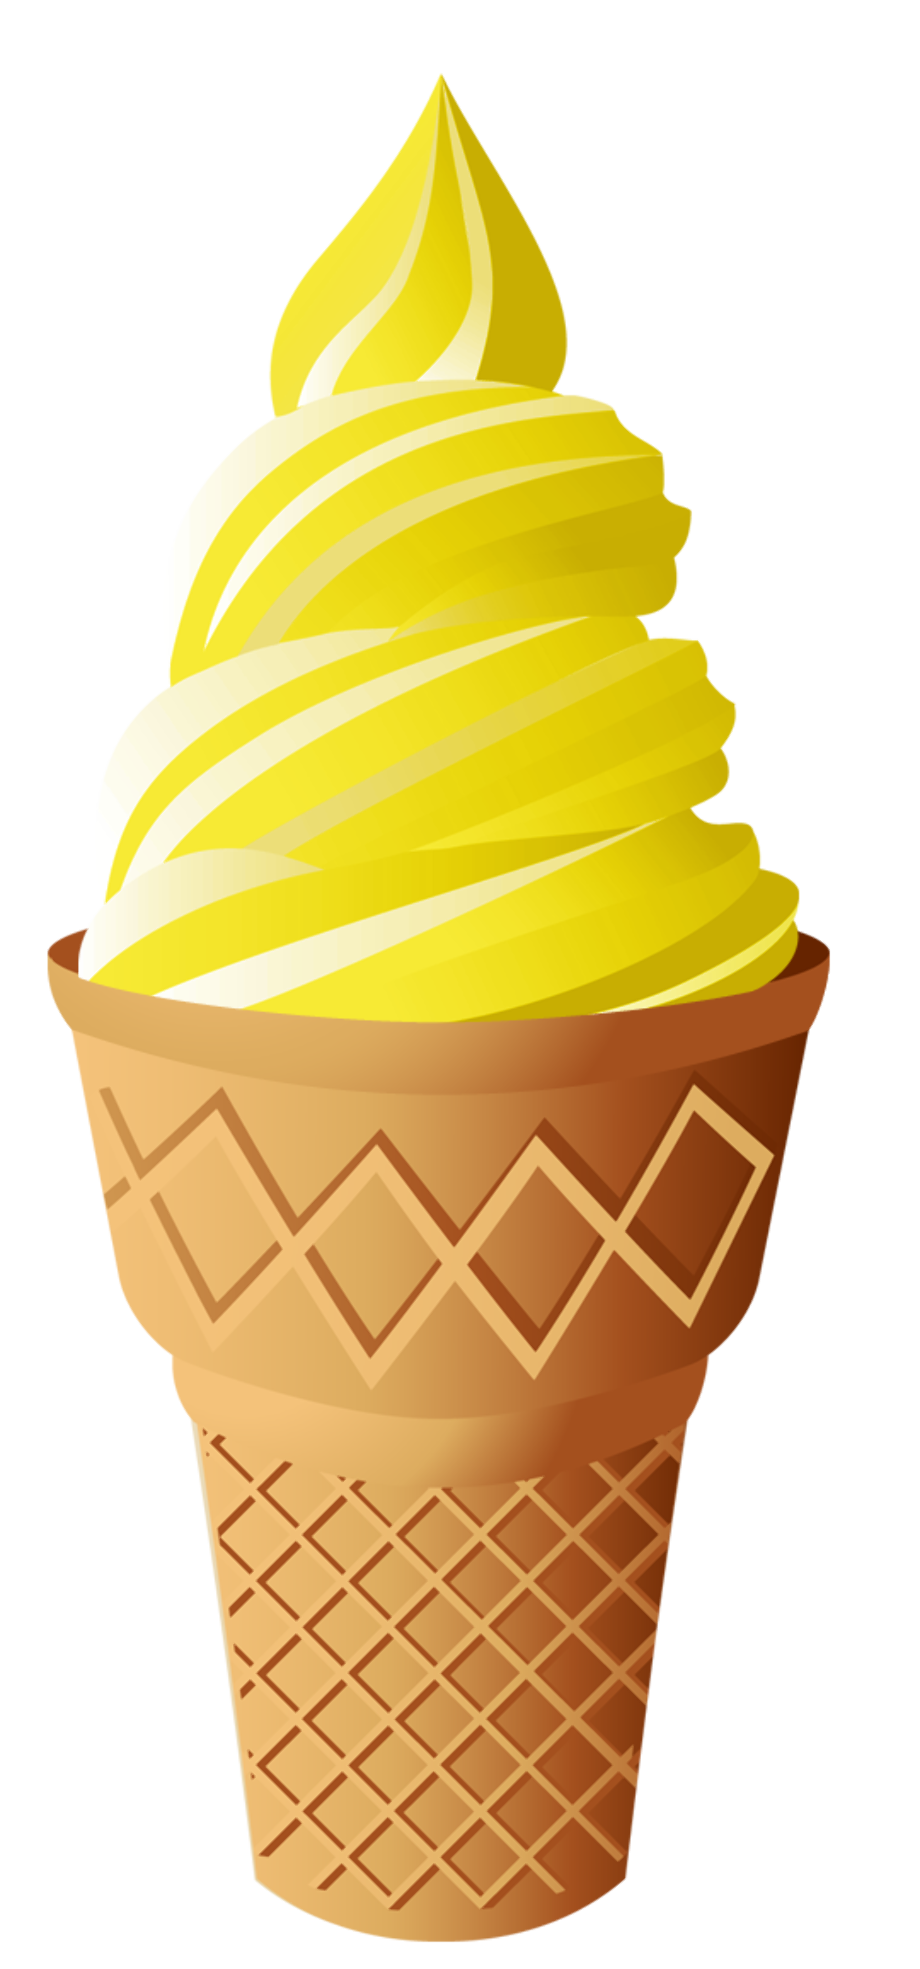 Download High Quality ice cream clipart yellow Transparent PNG Images